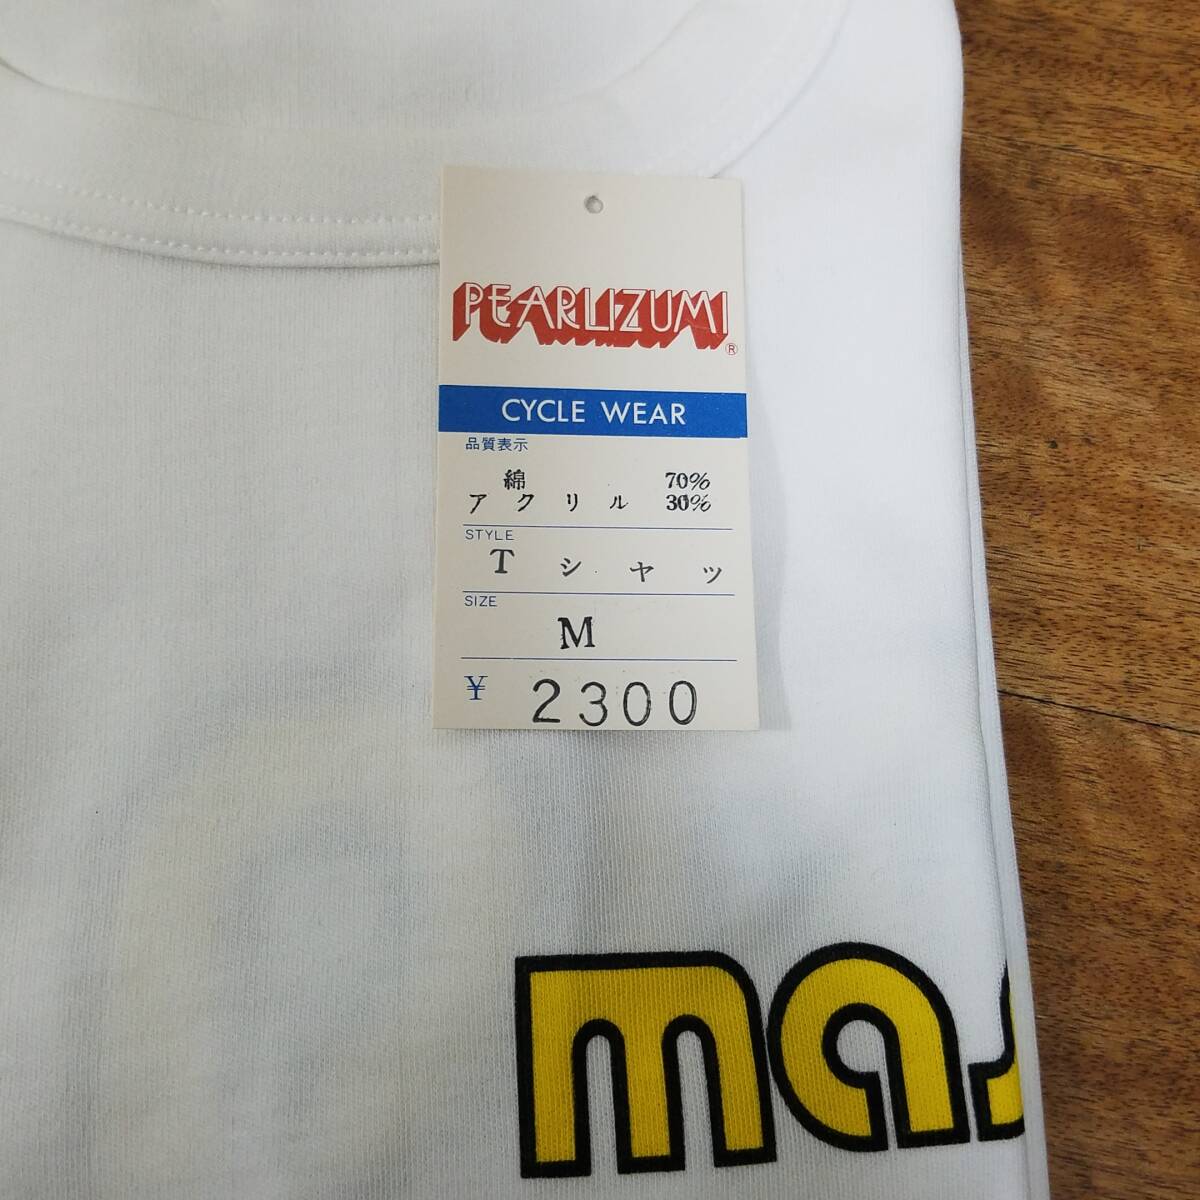 masi Tシャツ(М)　MADE IN JAPAN PEARL IZUMI CYCLE WEAR 　New Old Stock (NOS) 未使用品 ビンテージ_画像8